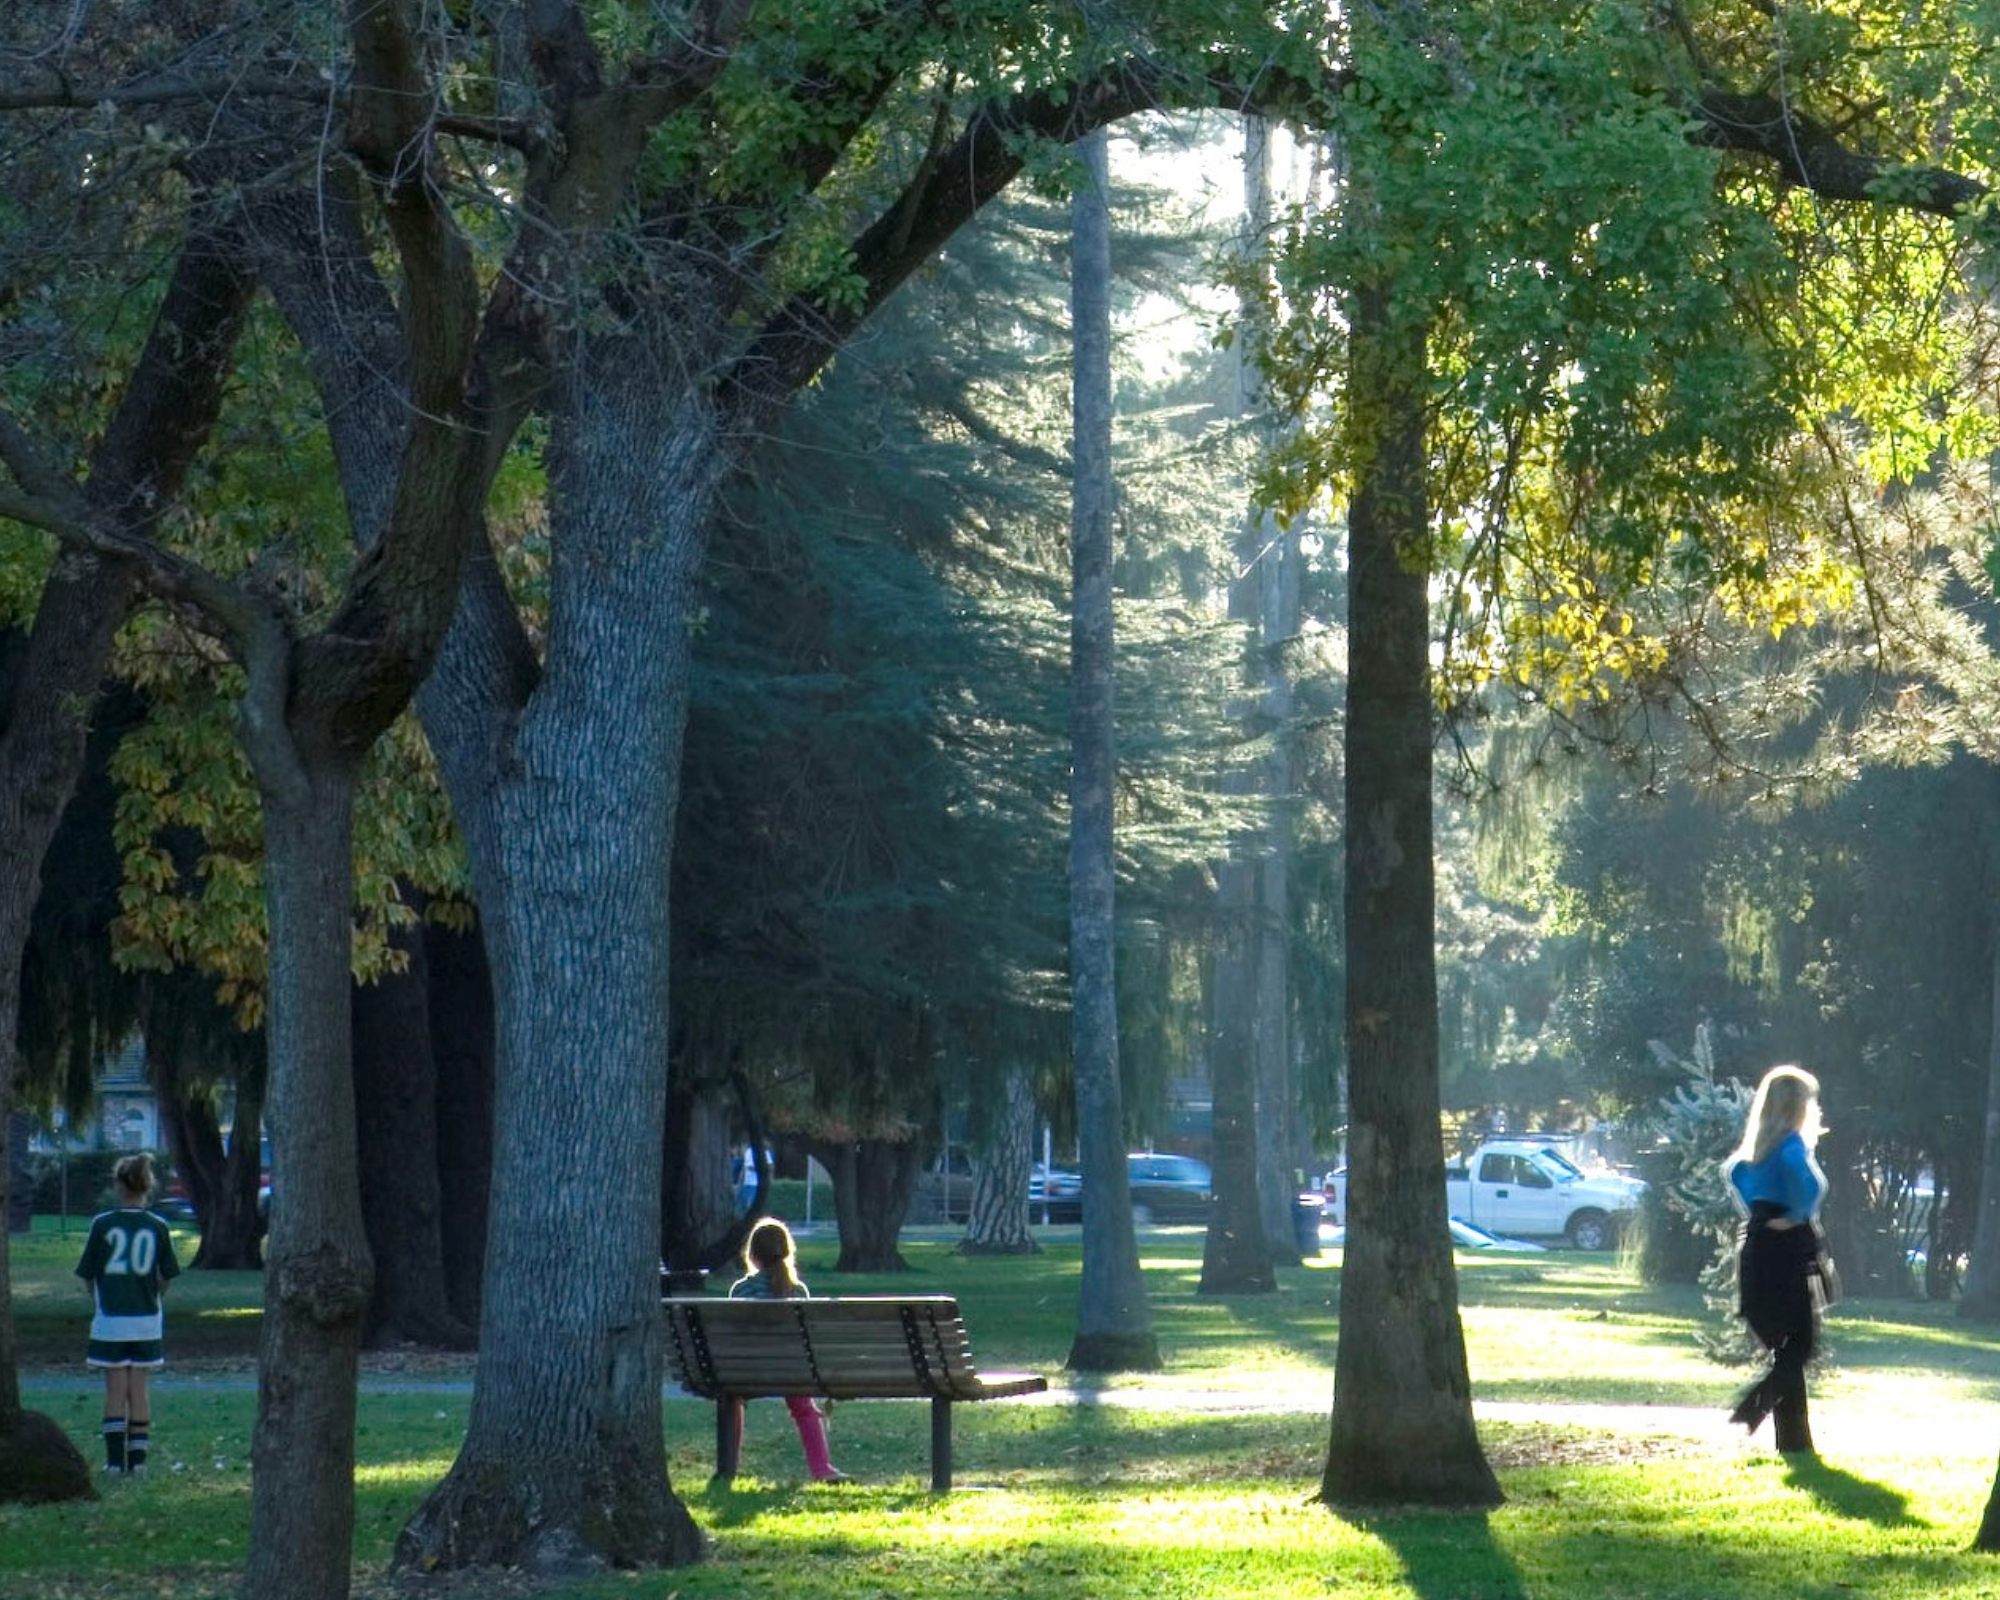 People sitting walking and exploring a park with trees